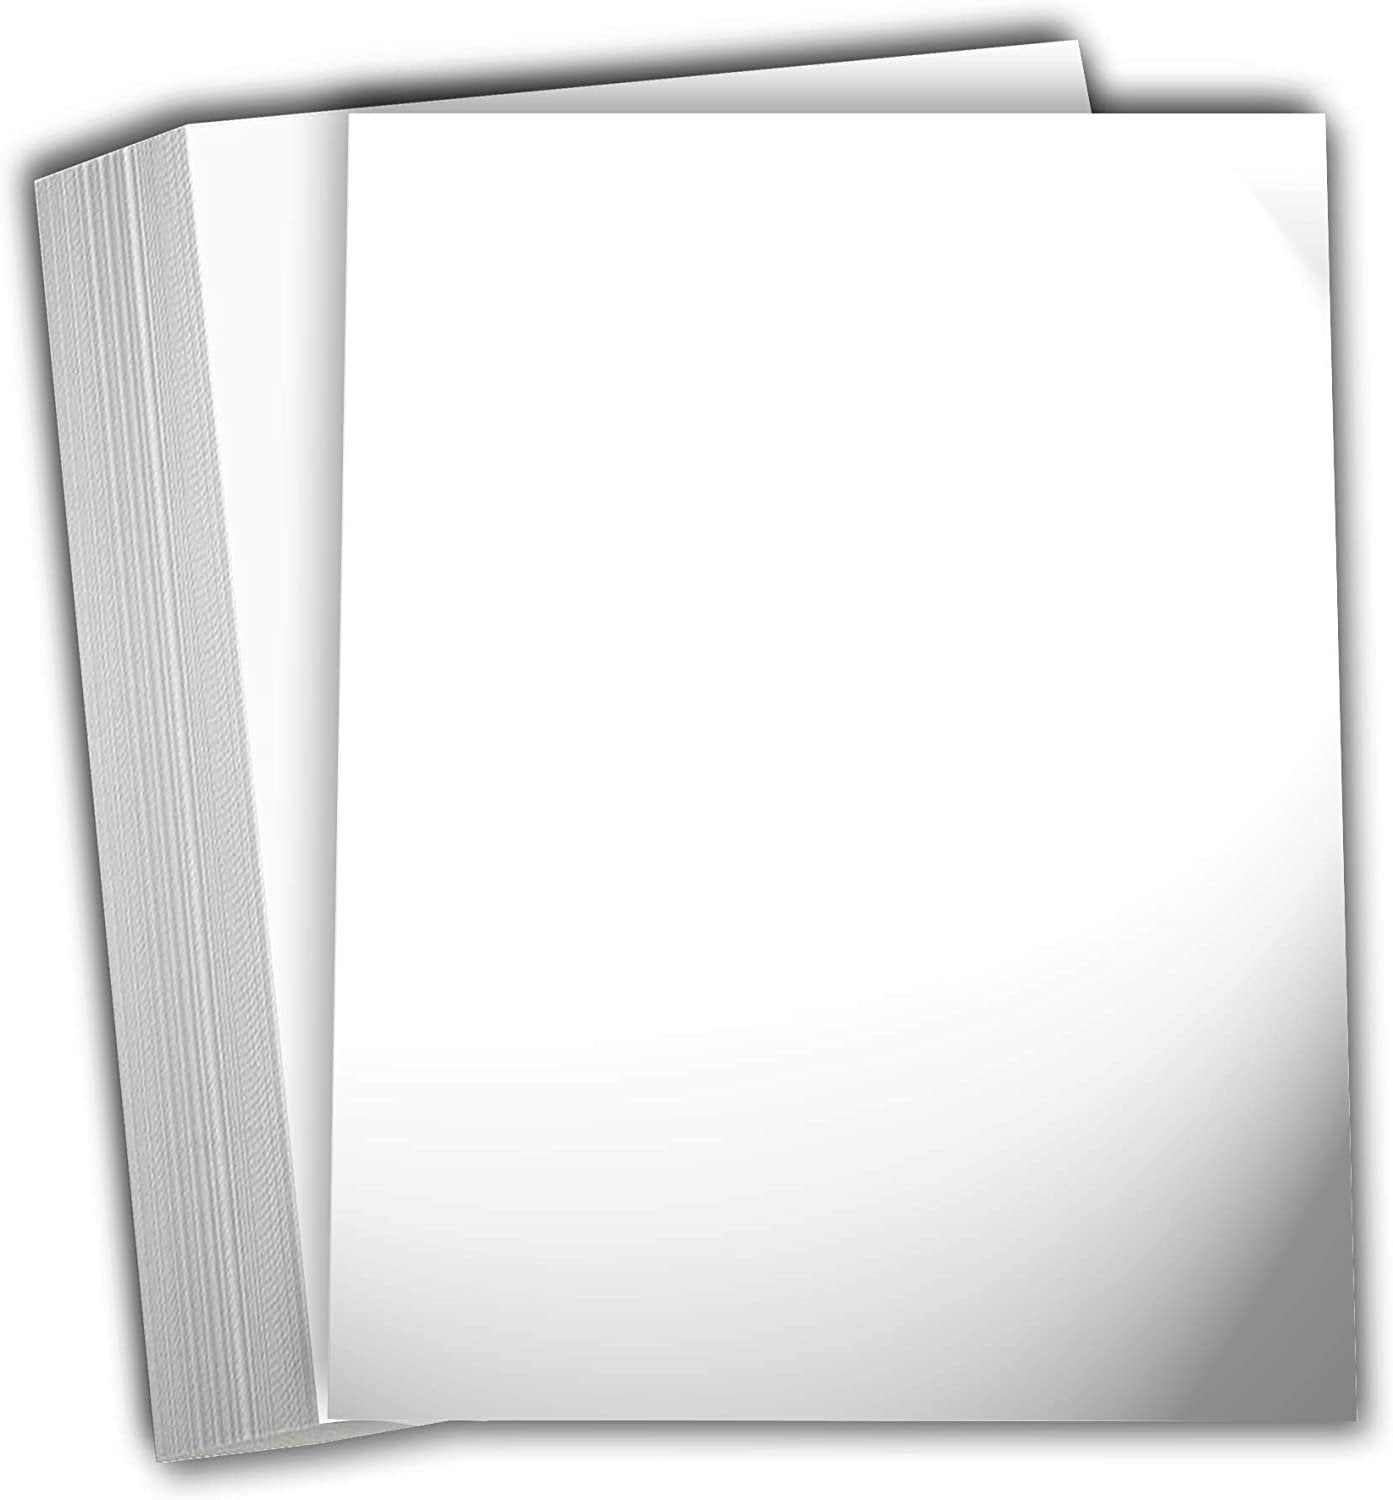 Glossy White 100lb. 12 x 18 Cardstock - Premium Quality from JAM